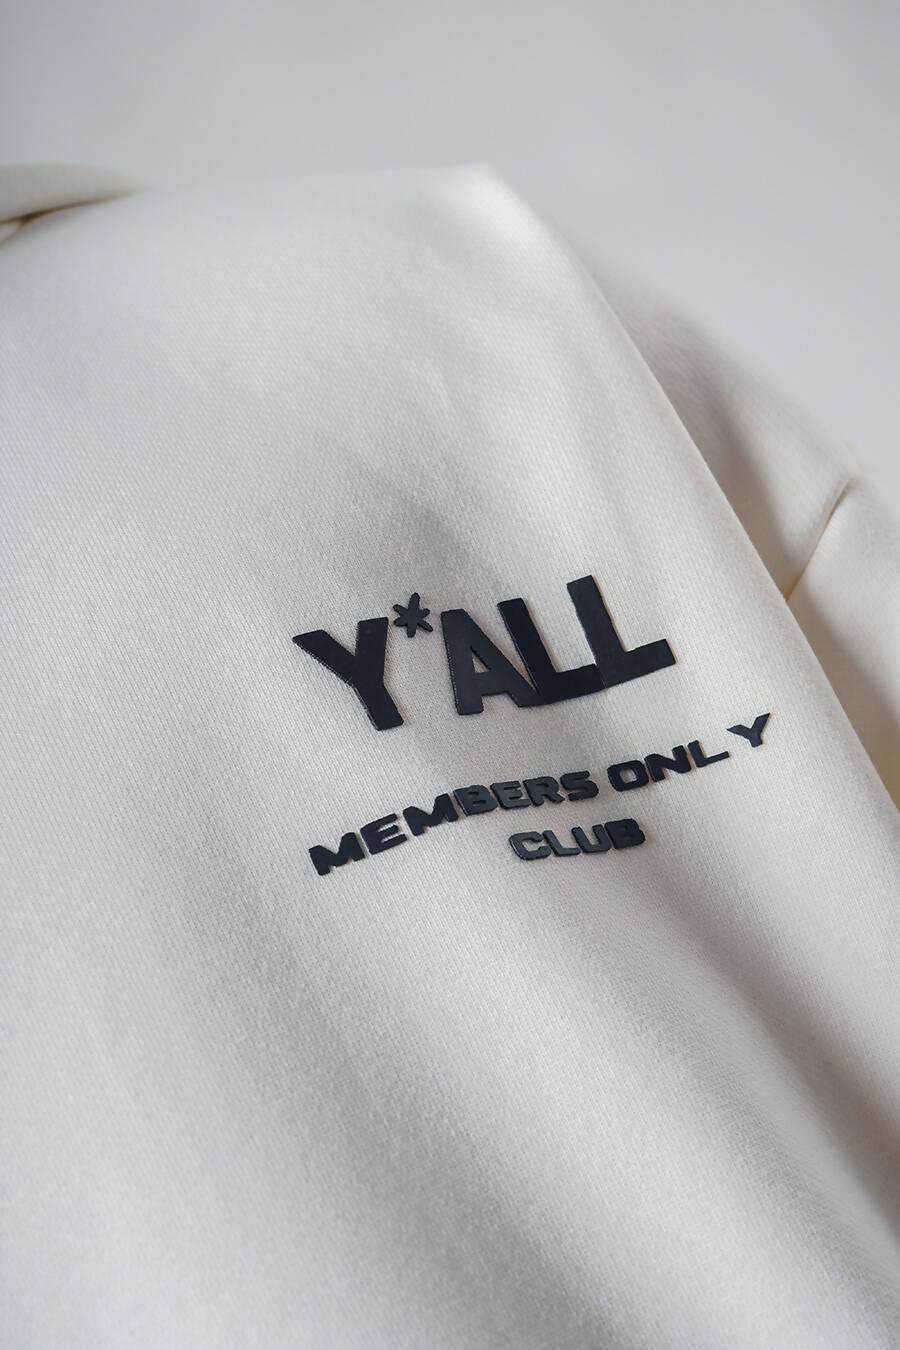 MEMBERS ONLY CLUB - NOT WHITE